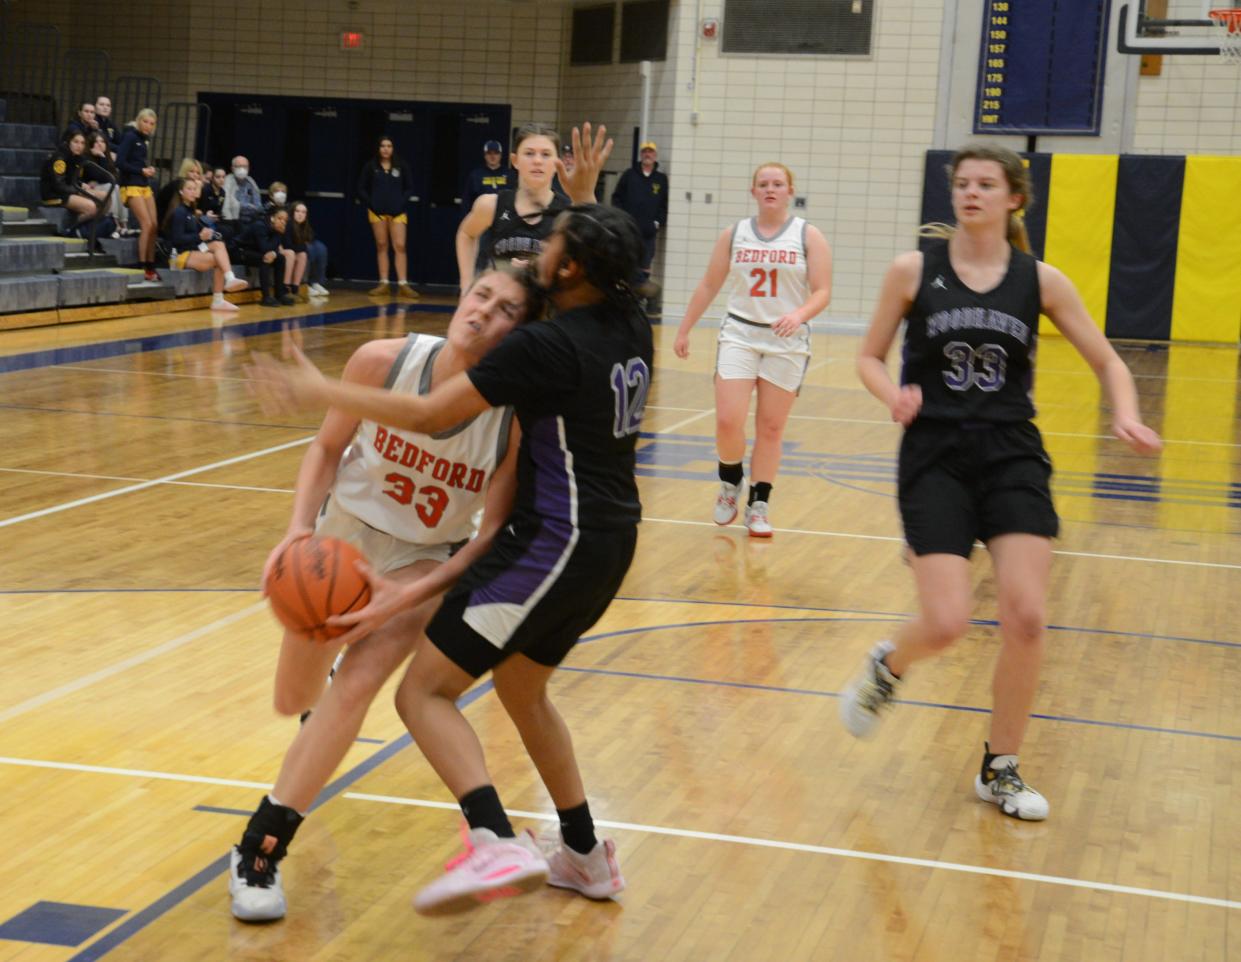 Bedford's Victoria Gray runs into Woodhaven defender Kamari Dabbs Wednesday during a 48-27 Beford win in the semifinals of the Division 1 District at Trenton.